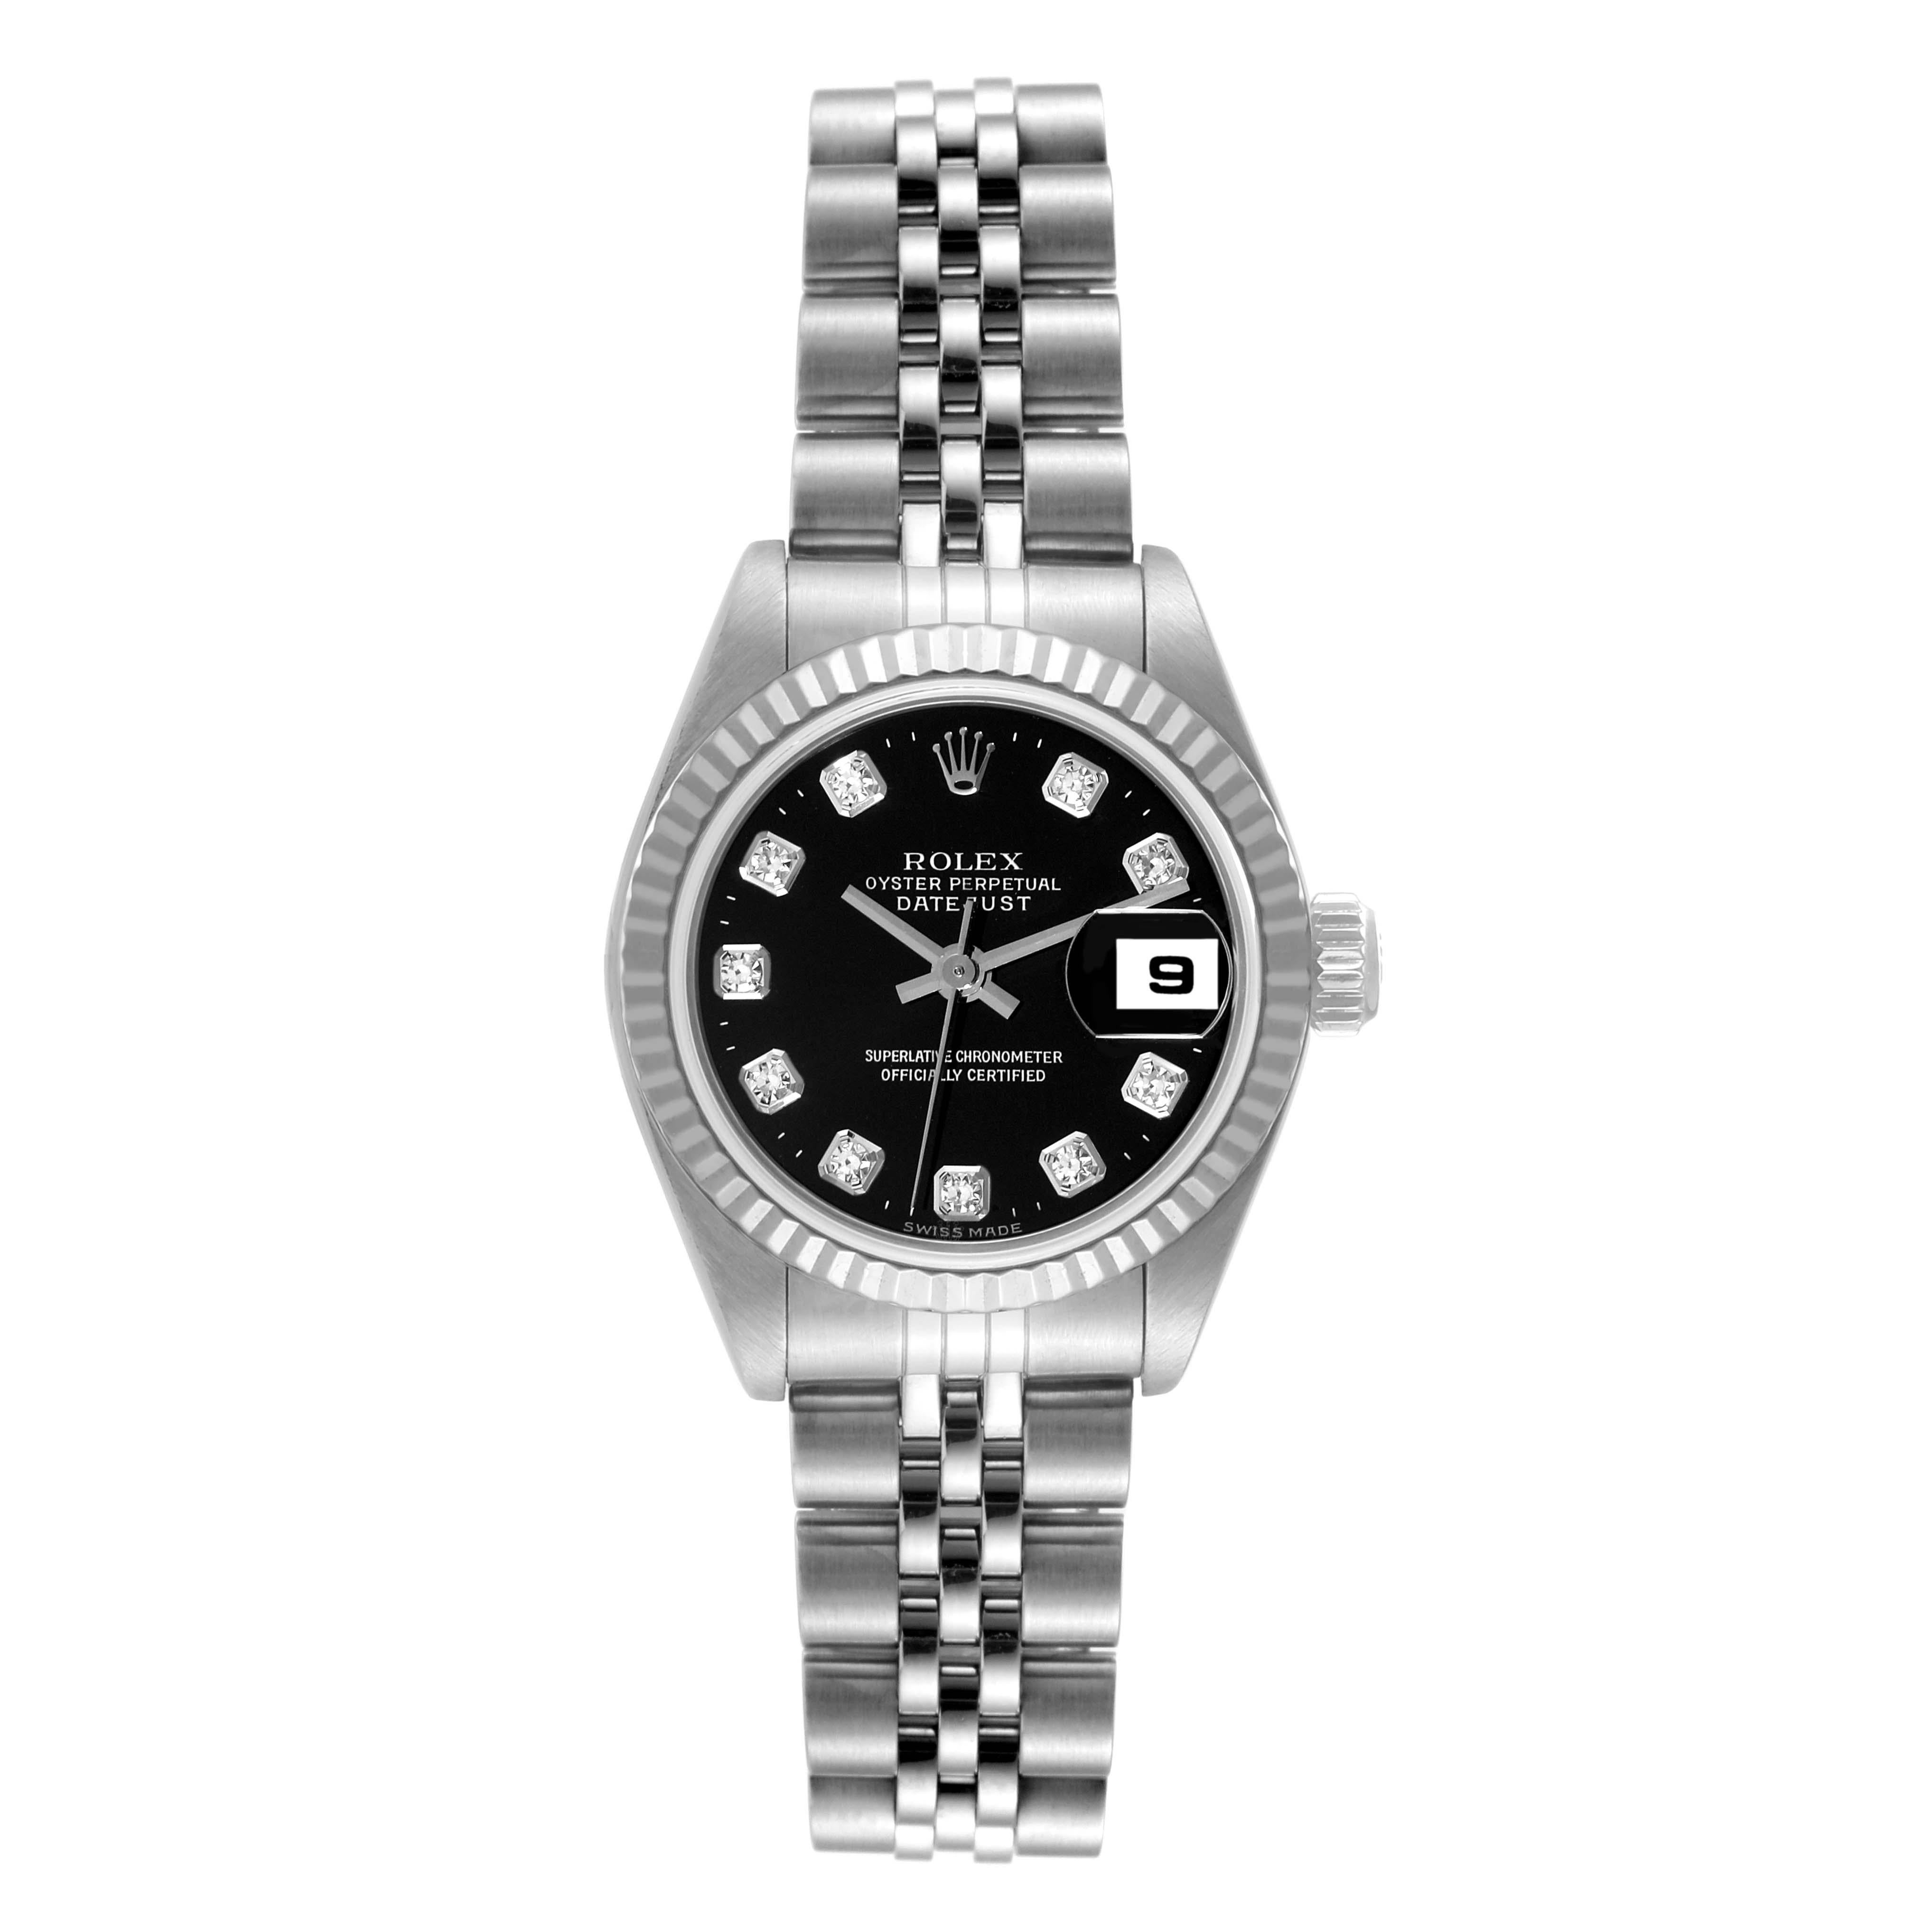 Rolex Datejust White Gold Black Diamond Dial Steel Ladies Watch 79174. Officially certified chronometer automatic self-winding movement. Stainless steel oyster case 26.0 mm in diameter. Rolex logo on the crown. 18K white gold fluted bezel. Scratch